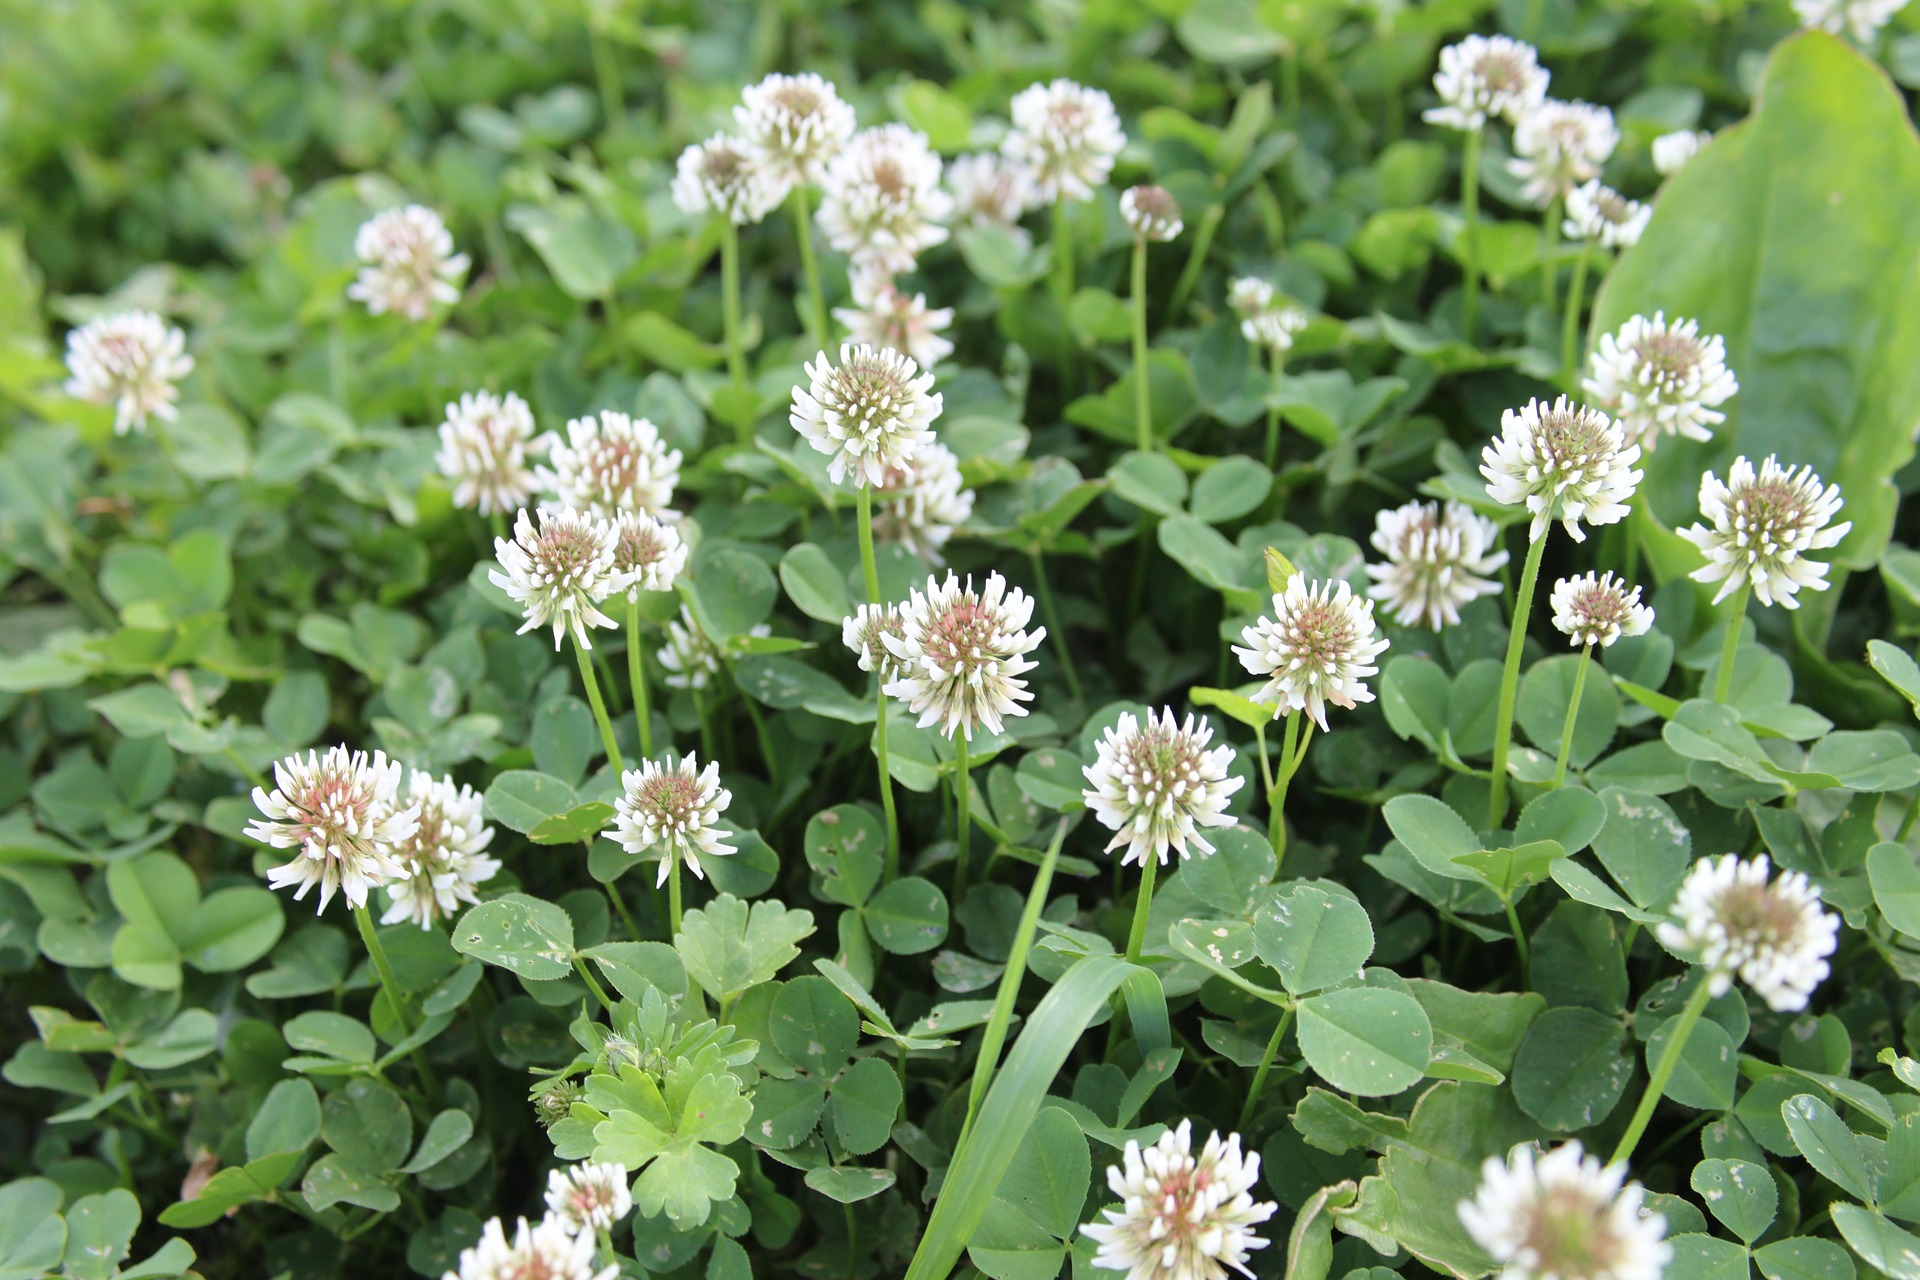 Broadcasting Clover and Overseeding Pastures